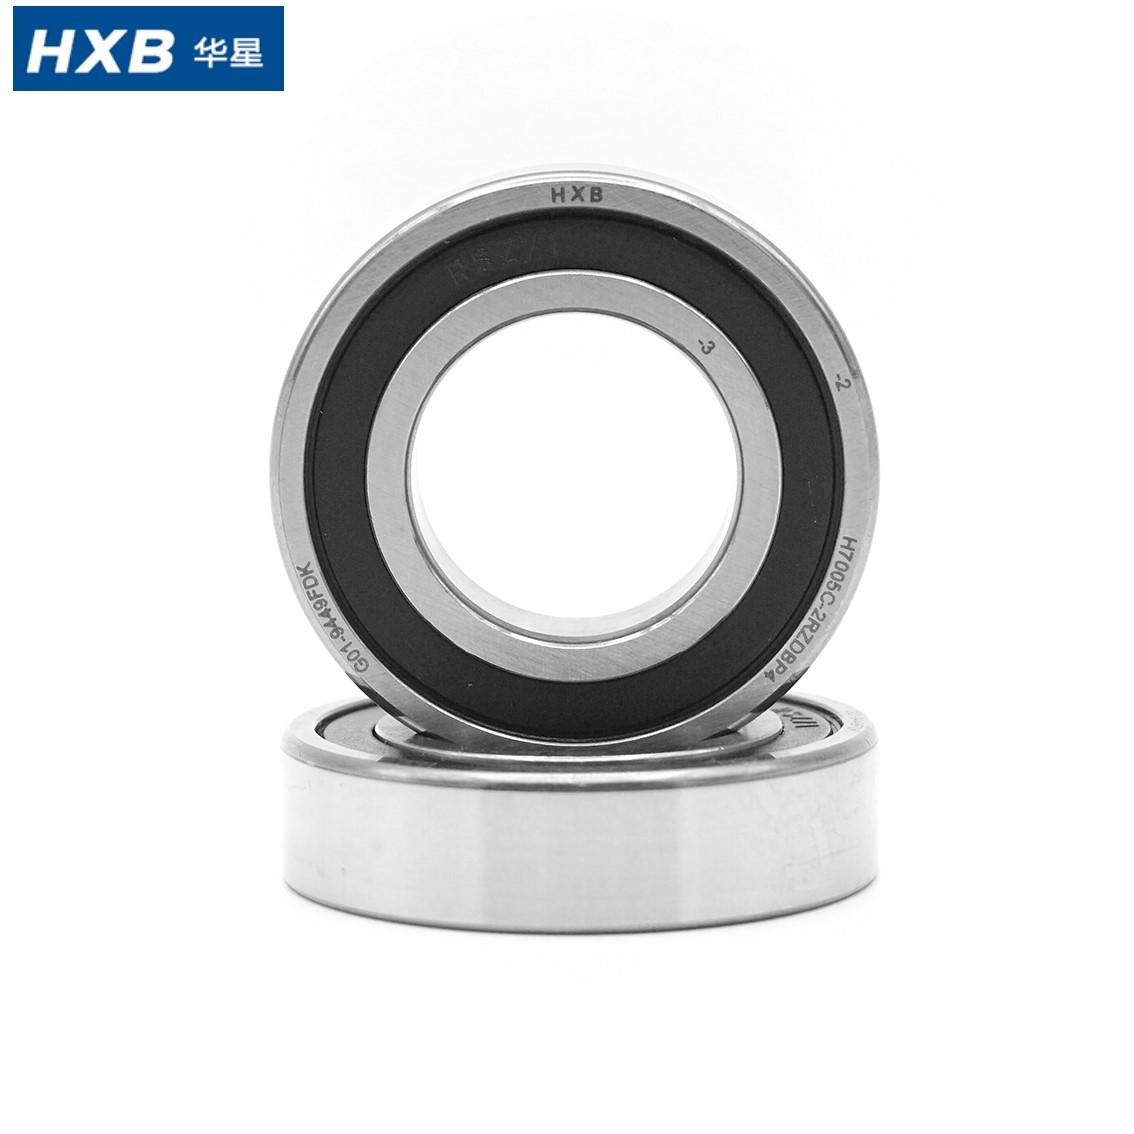 H7205-C-2RZ-DT/DB-P4 25*52*15mm high speed angular contact ball bearings for CNC router